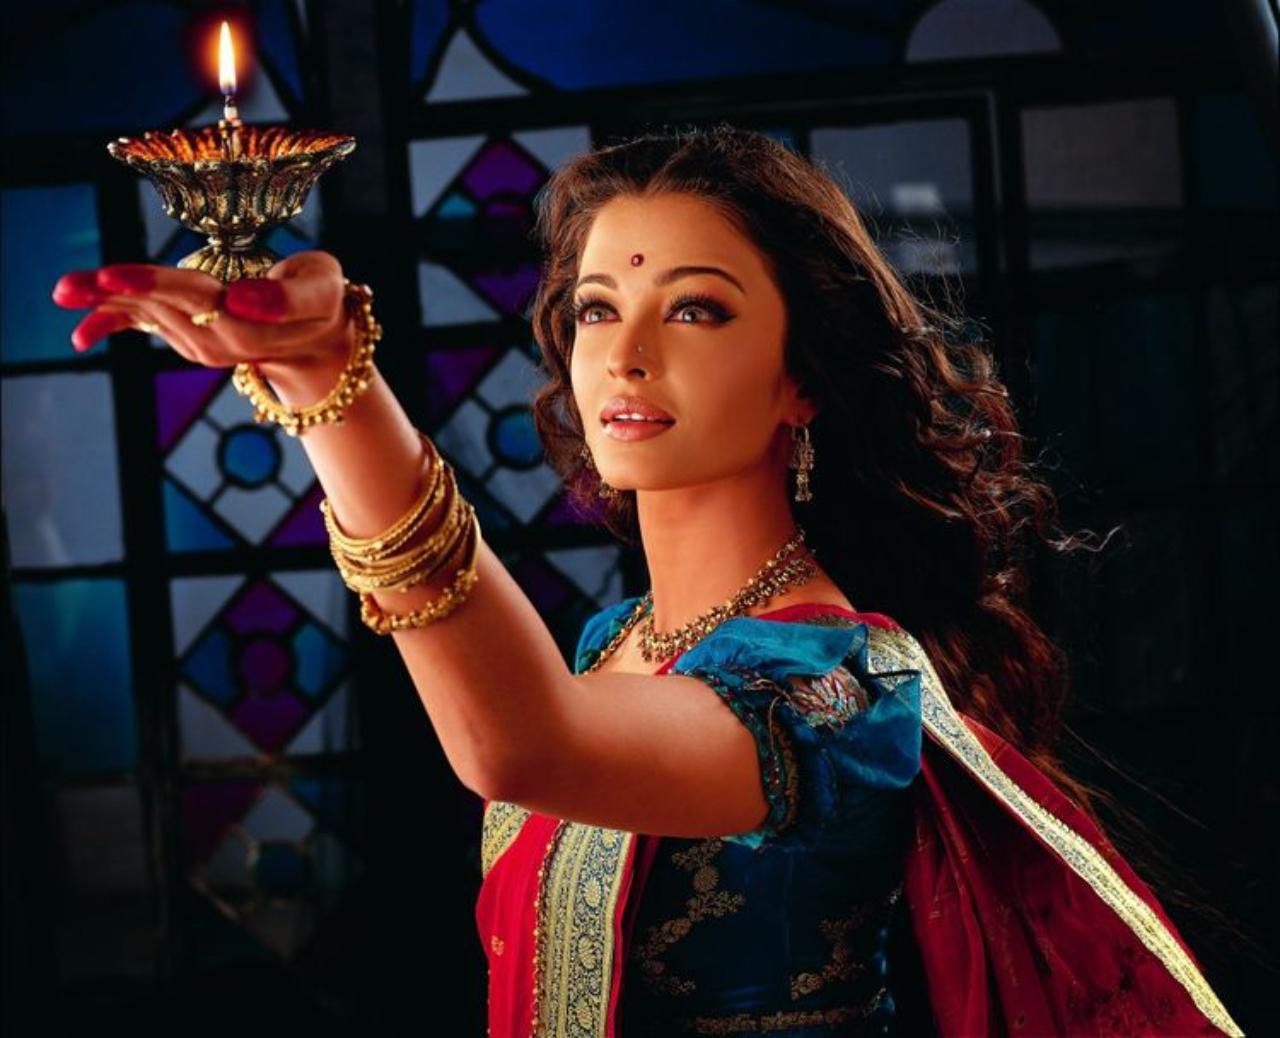 Paro and Chandramukhi in Devdas
With Devdas, Bhansali introduced two women who portrayed the emotional side of women beautifully. While Aishwarya played Paro, Madhuri Dixit essayed the role of Chandramukhi in the film that has Shah Rukh Khan as Devdas. On one hand, Paro stands tall and doesn't get overshadowed by her feelings, and on the other, Chandramukhi, despite being ostracized by society, remains loyal to her love
 
 